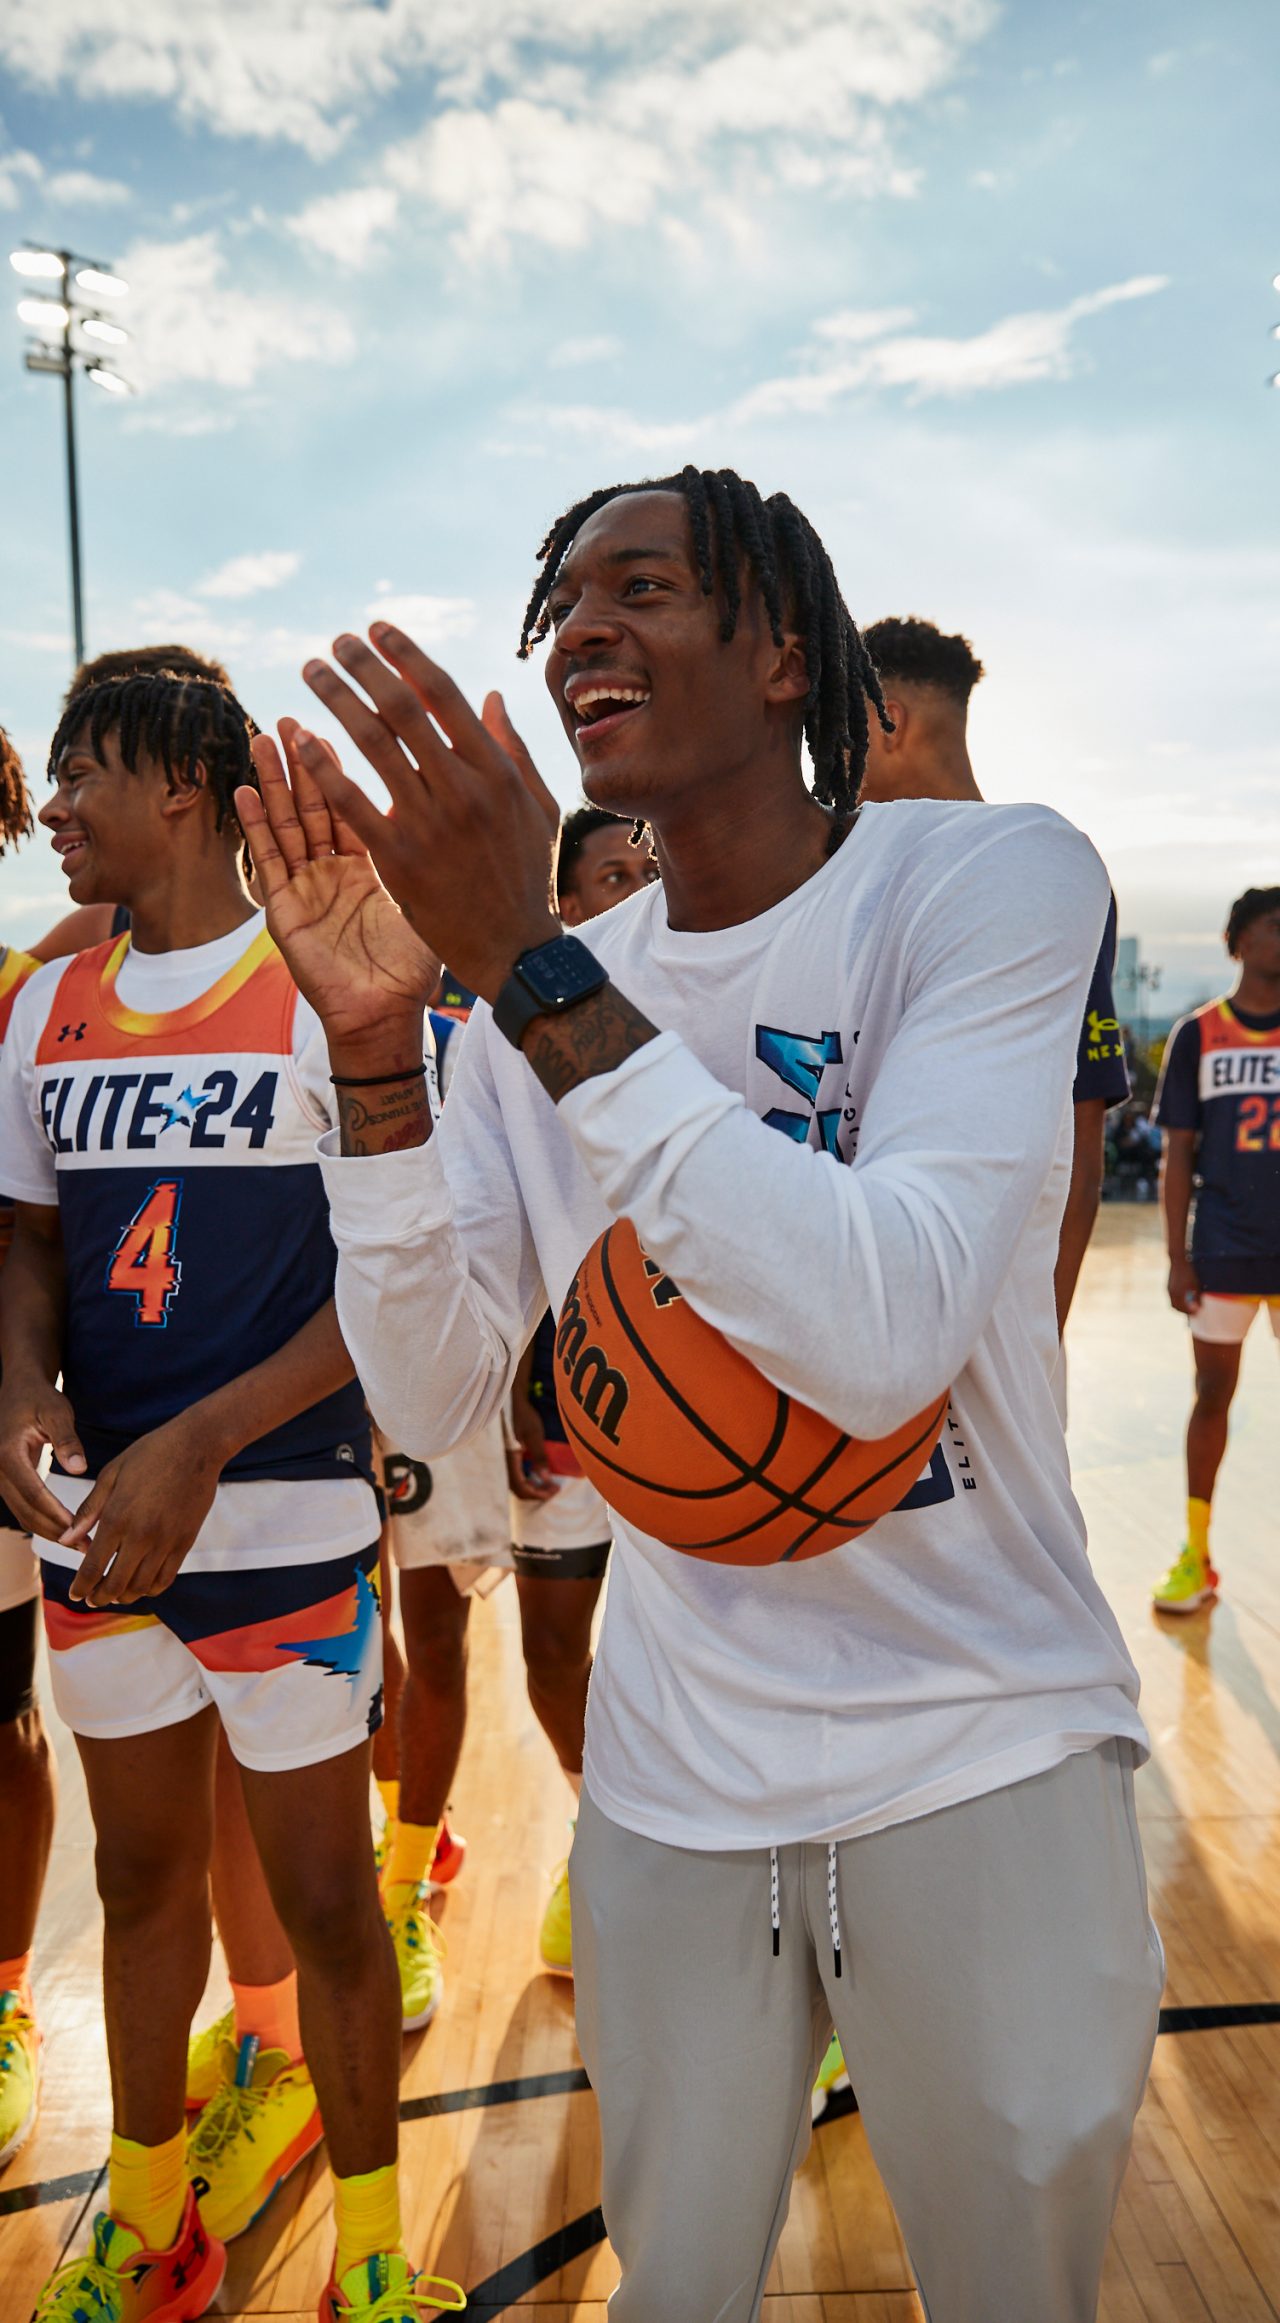 Under Armour Brings Together the Next Generation of Basketball Stars at